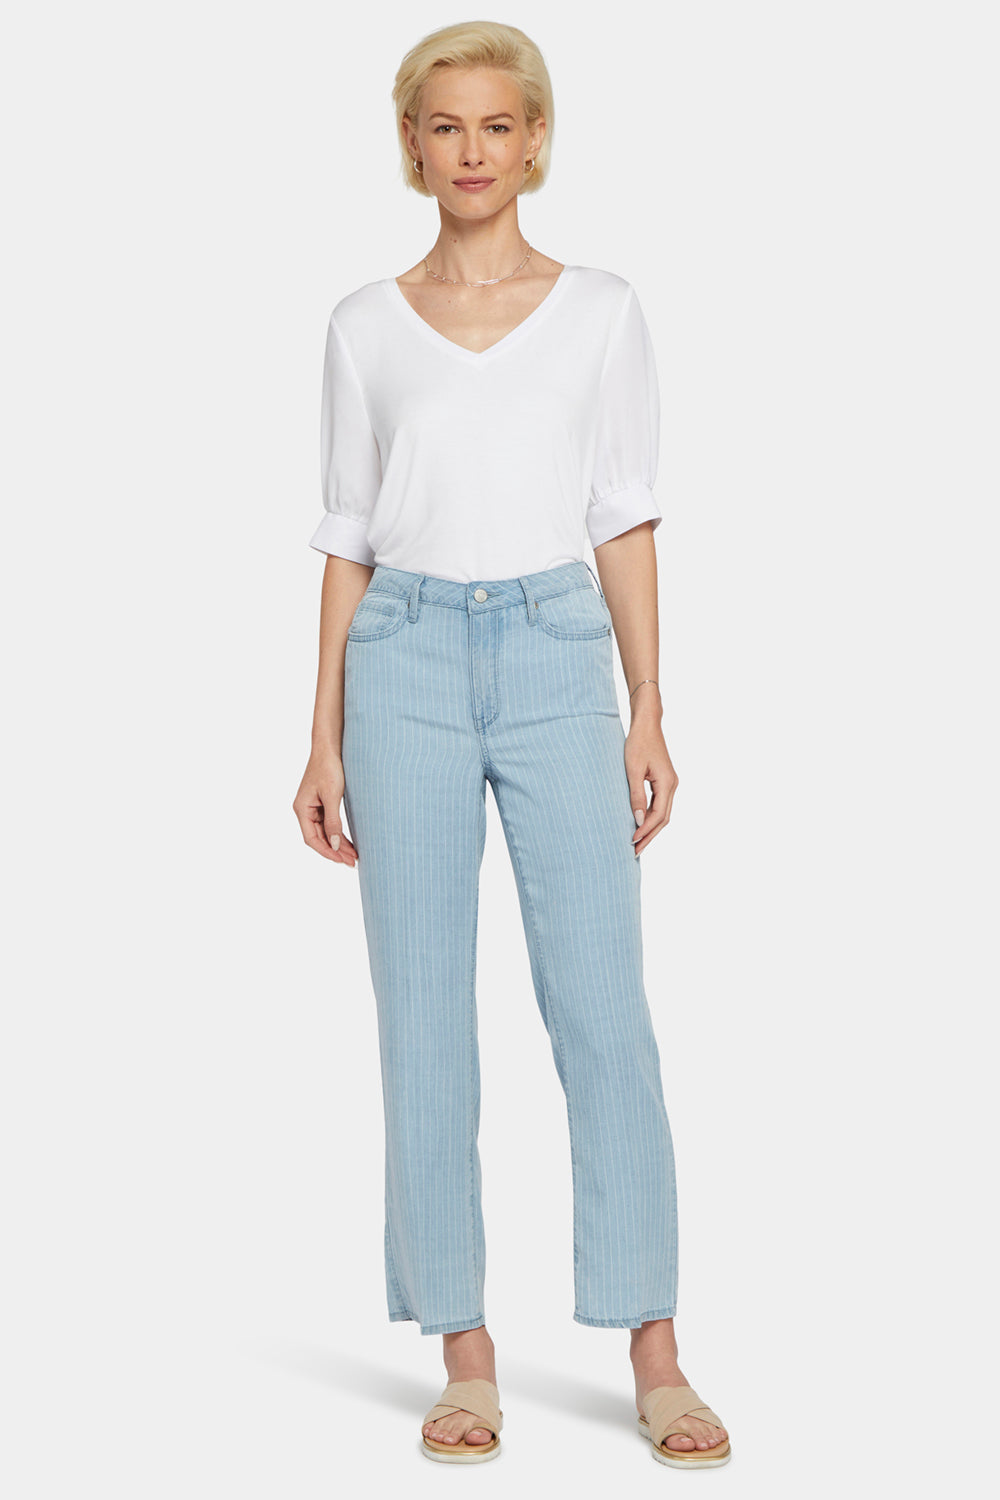 NYDJ Relaxed Straight Ankle Jeans  - Summerville Stripes